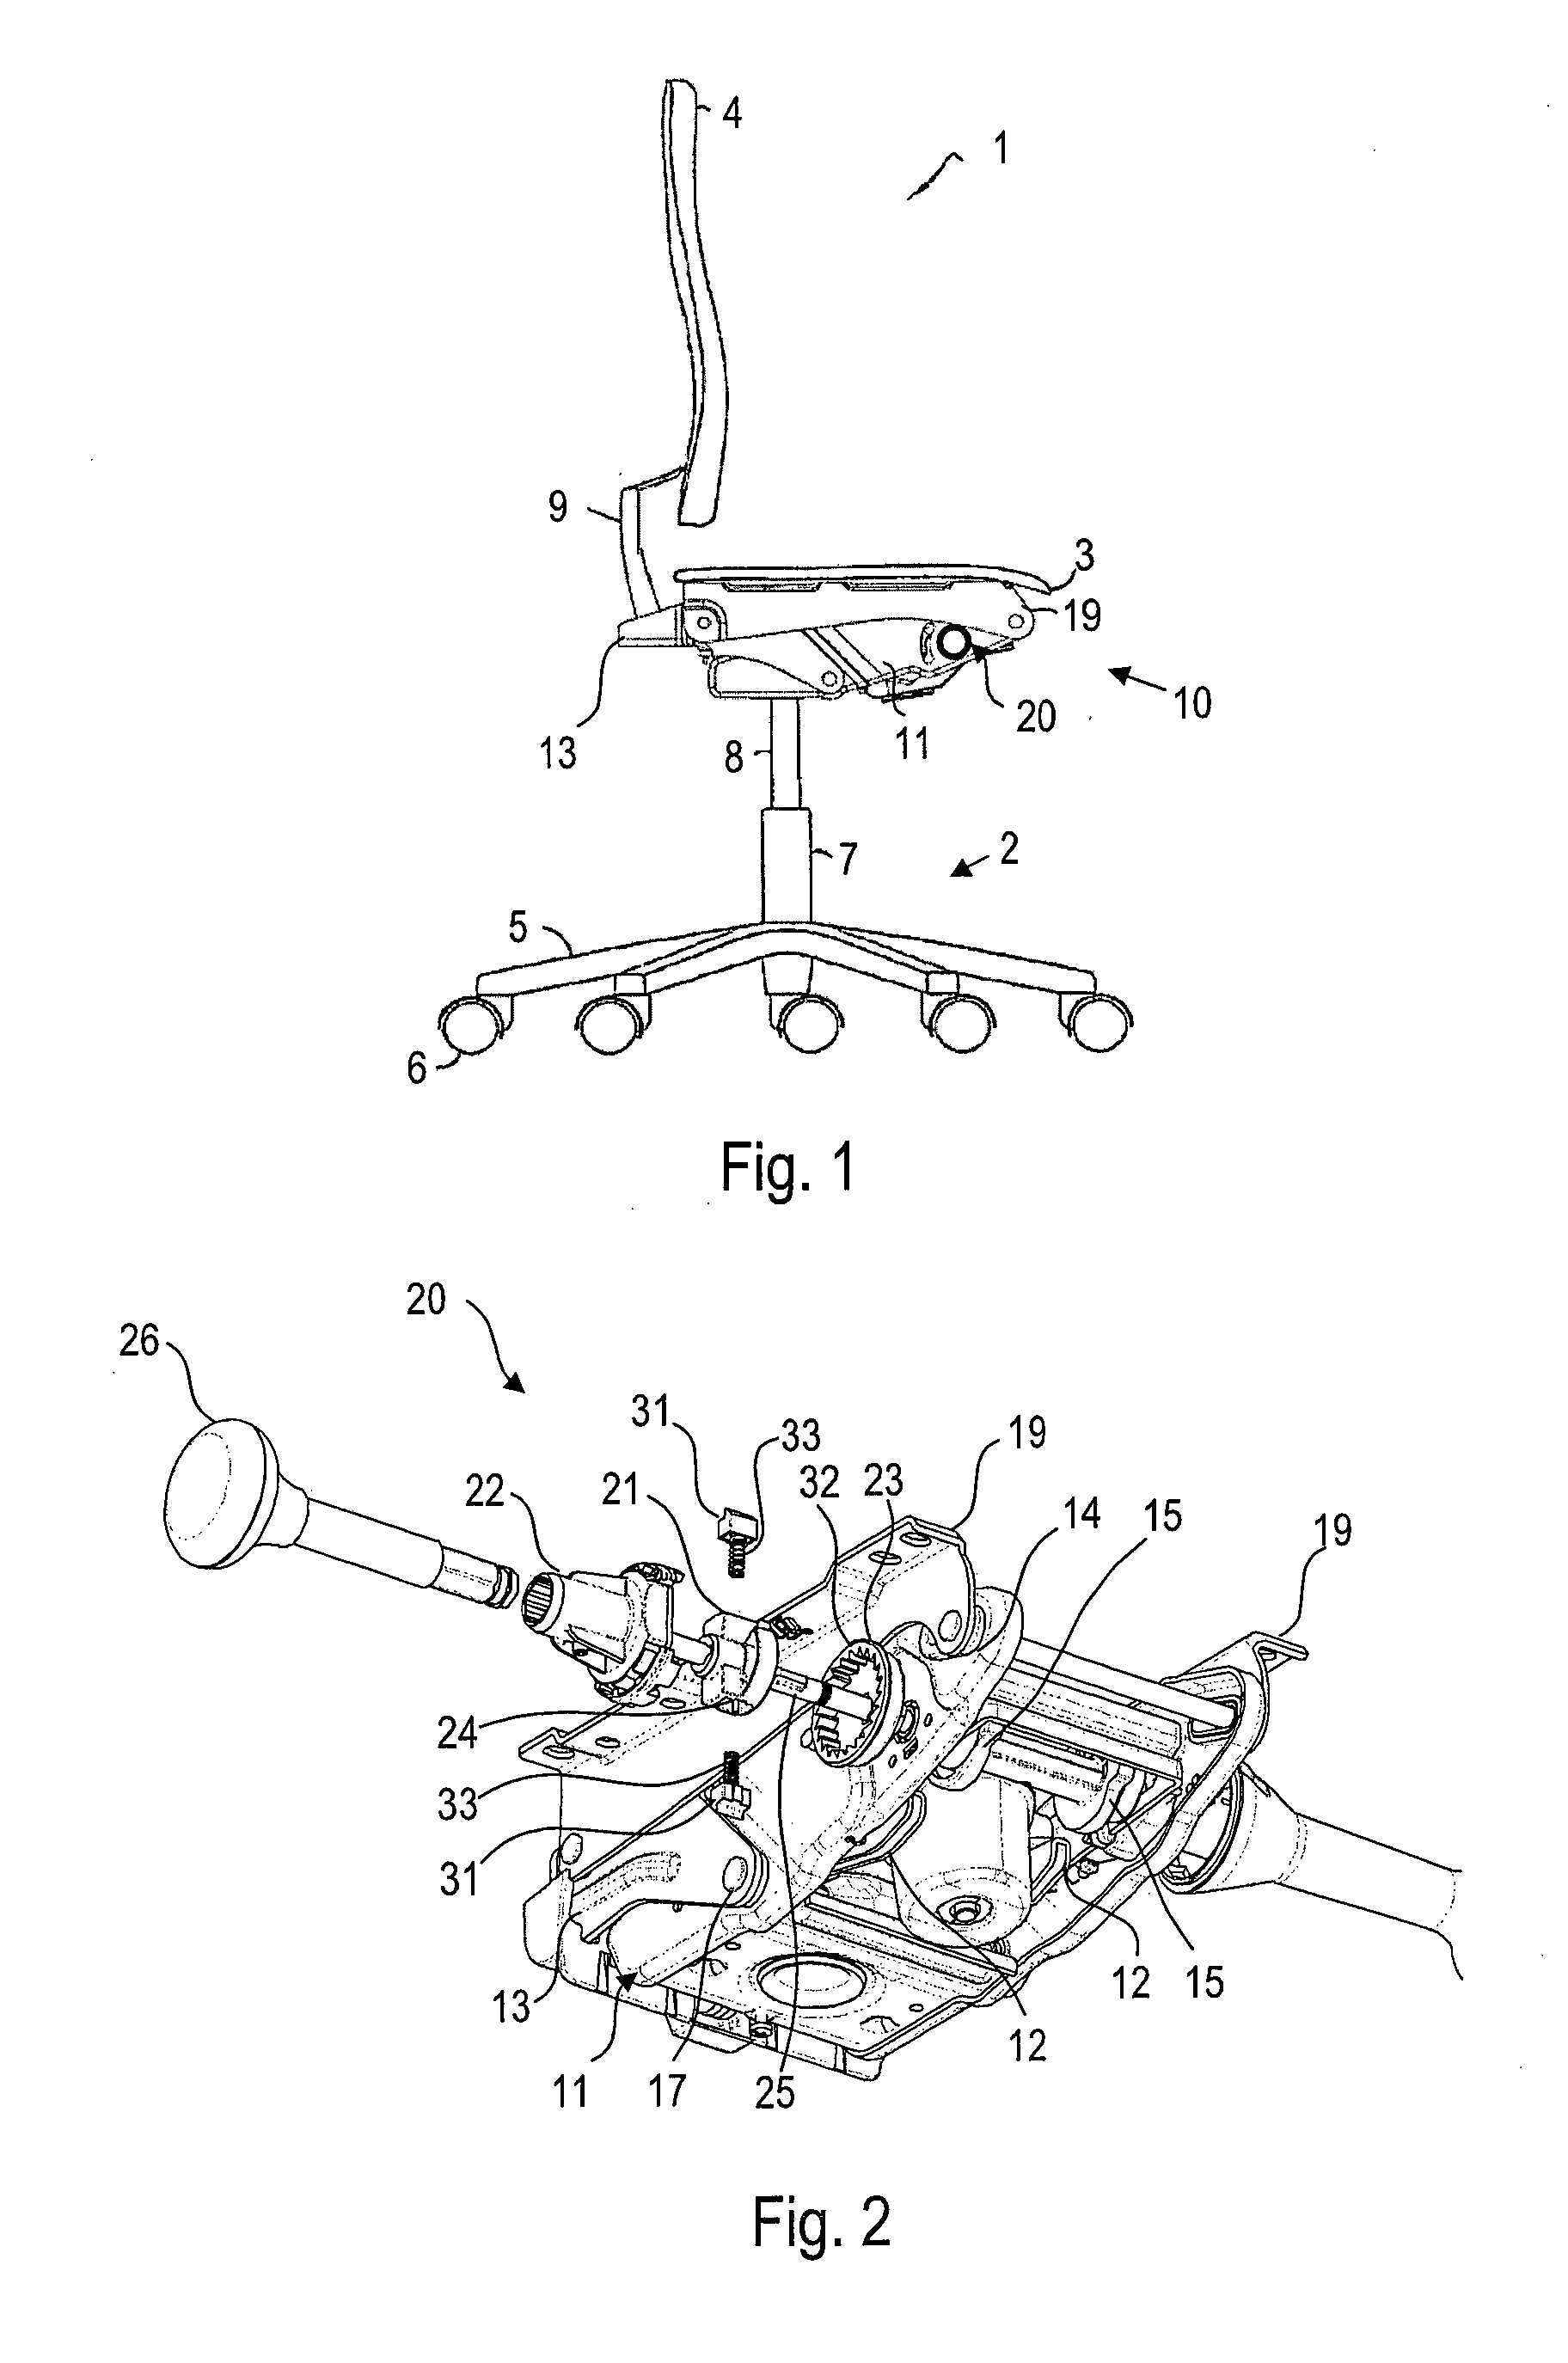 Tension adjust device for a chair and chair